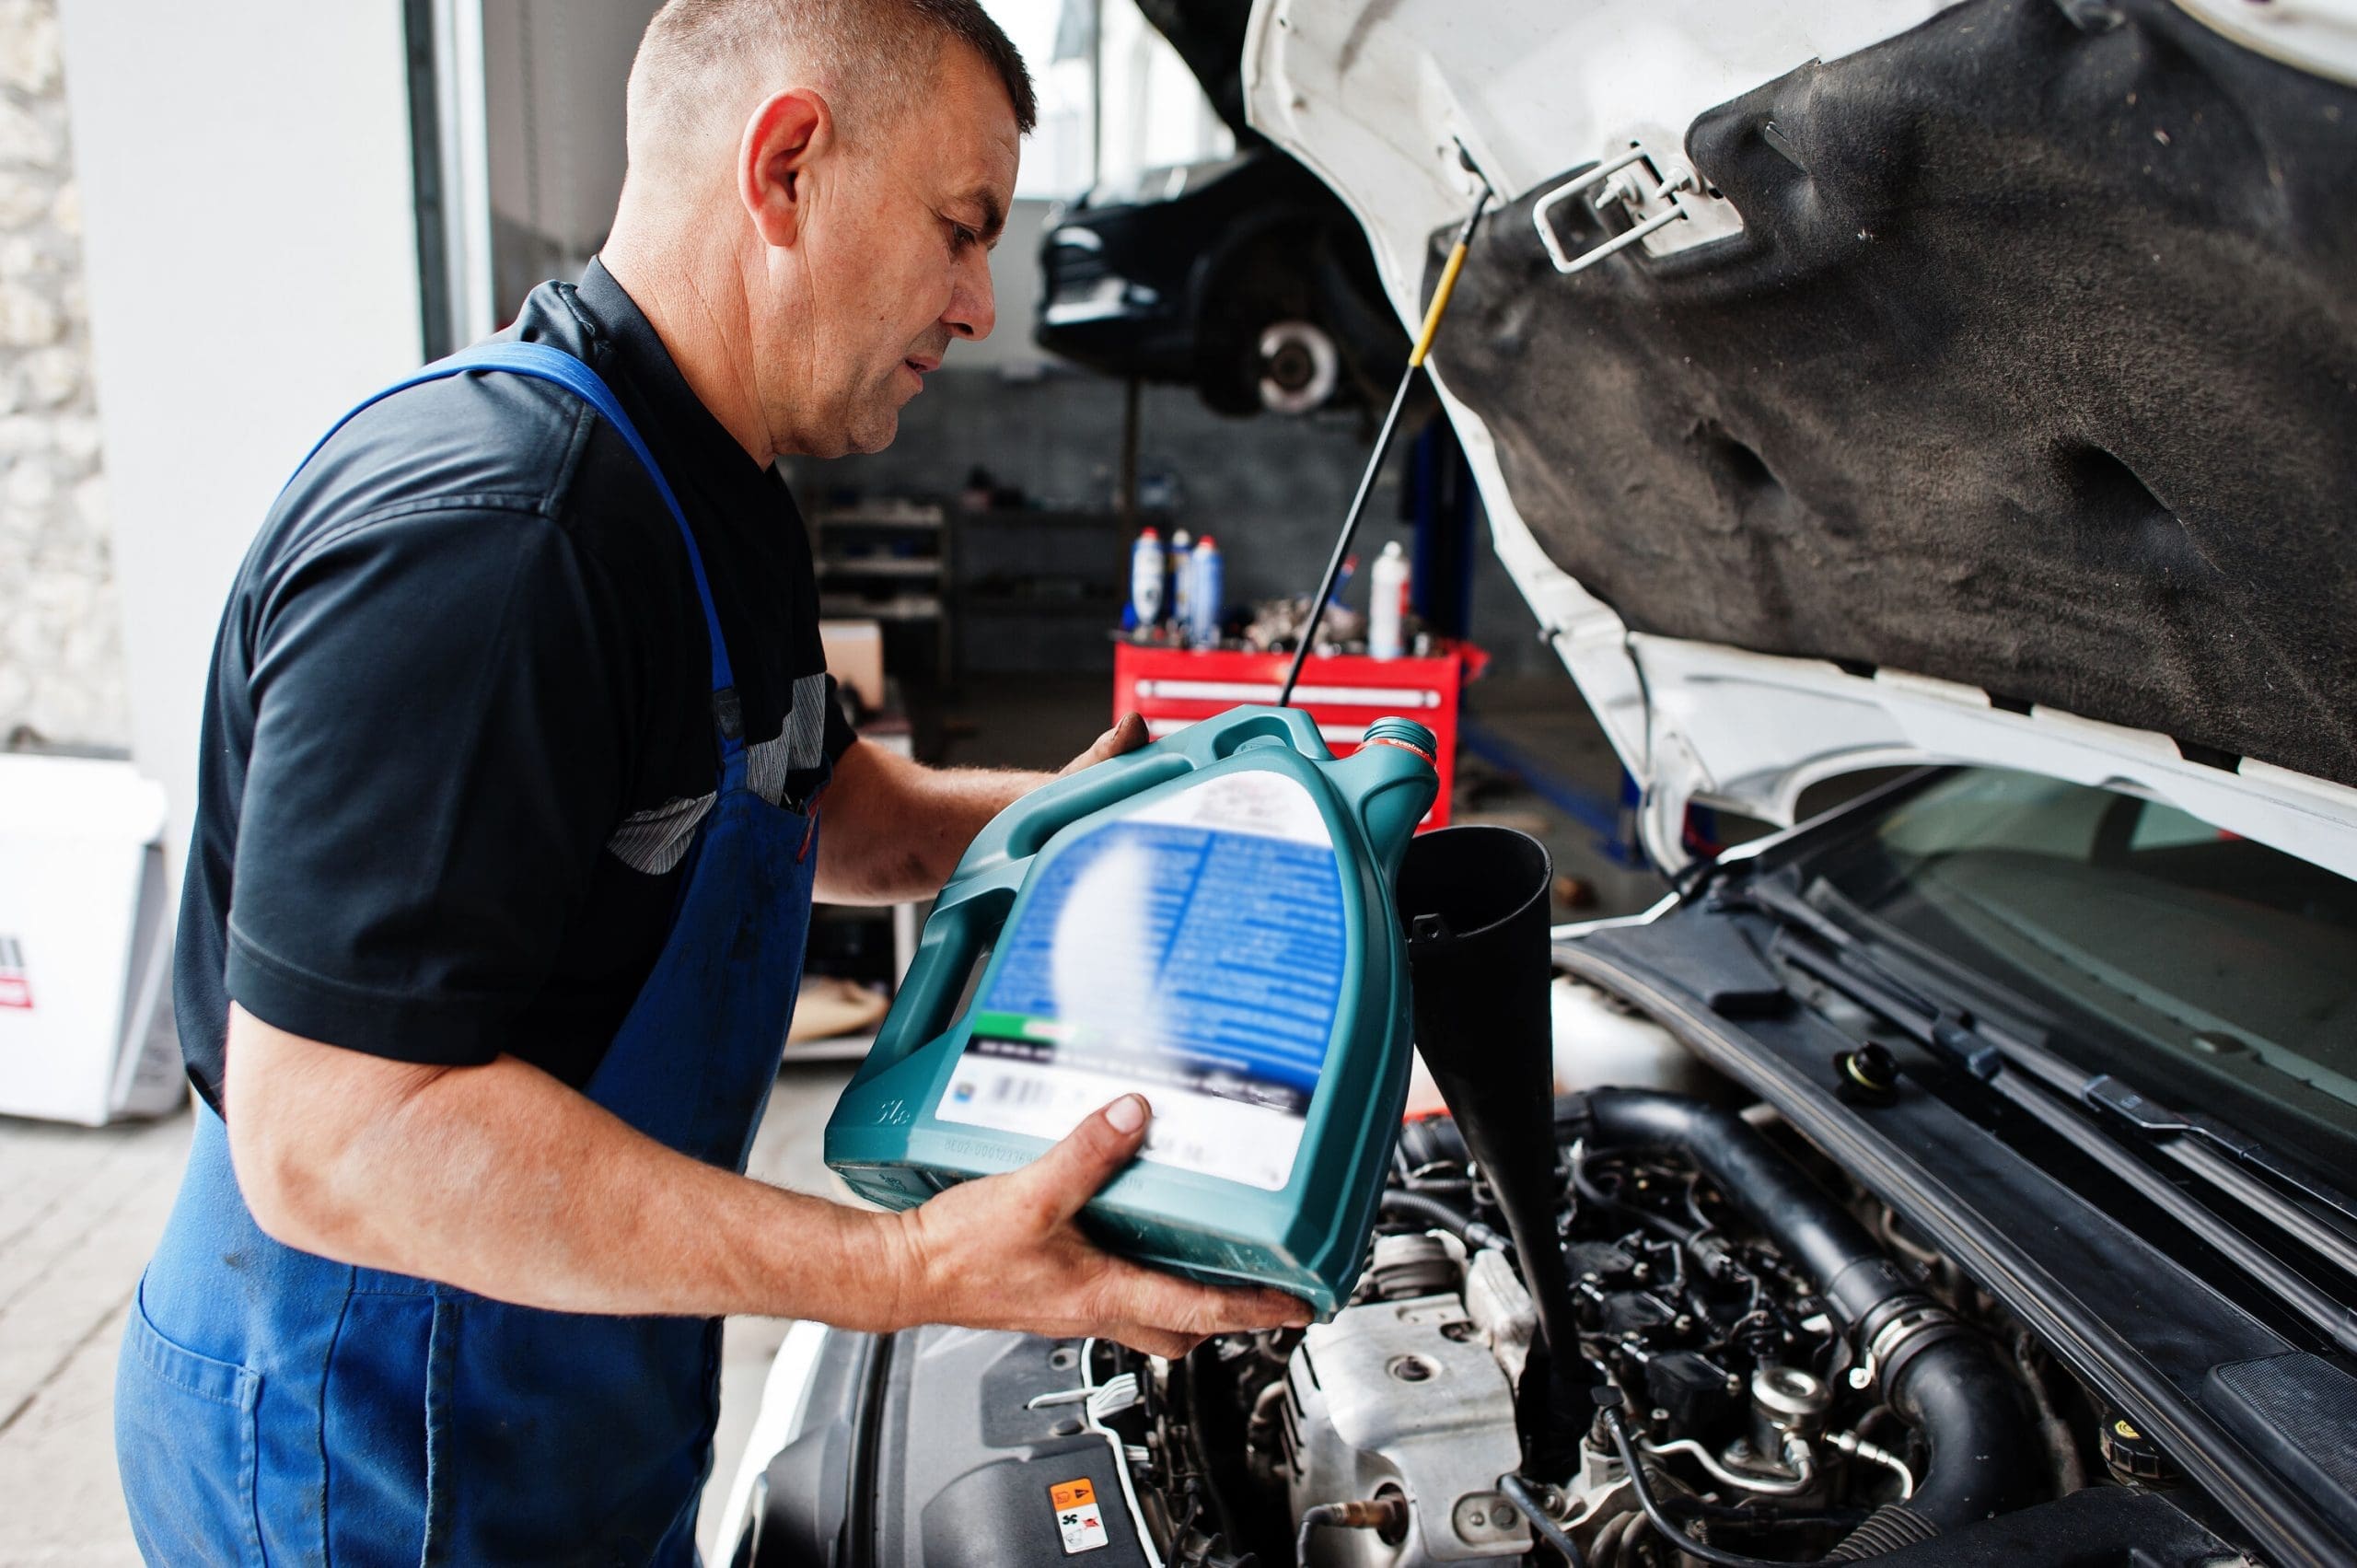 Does an oil change make your car run better? car service, car oil change service, oil change services